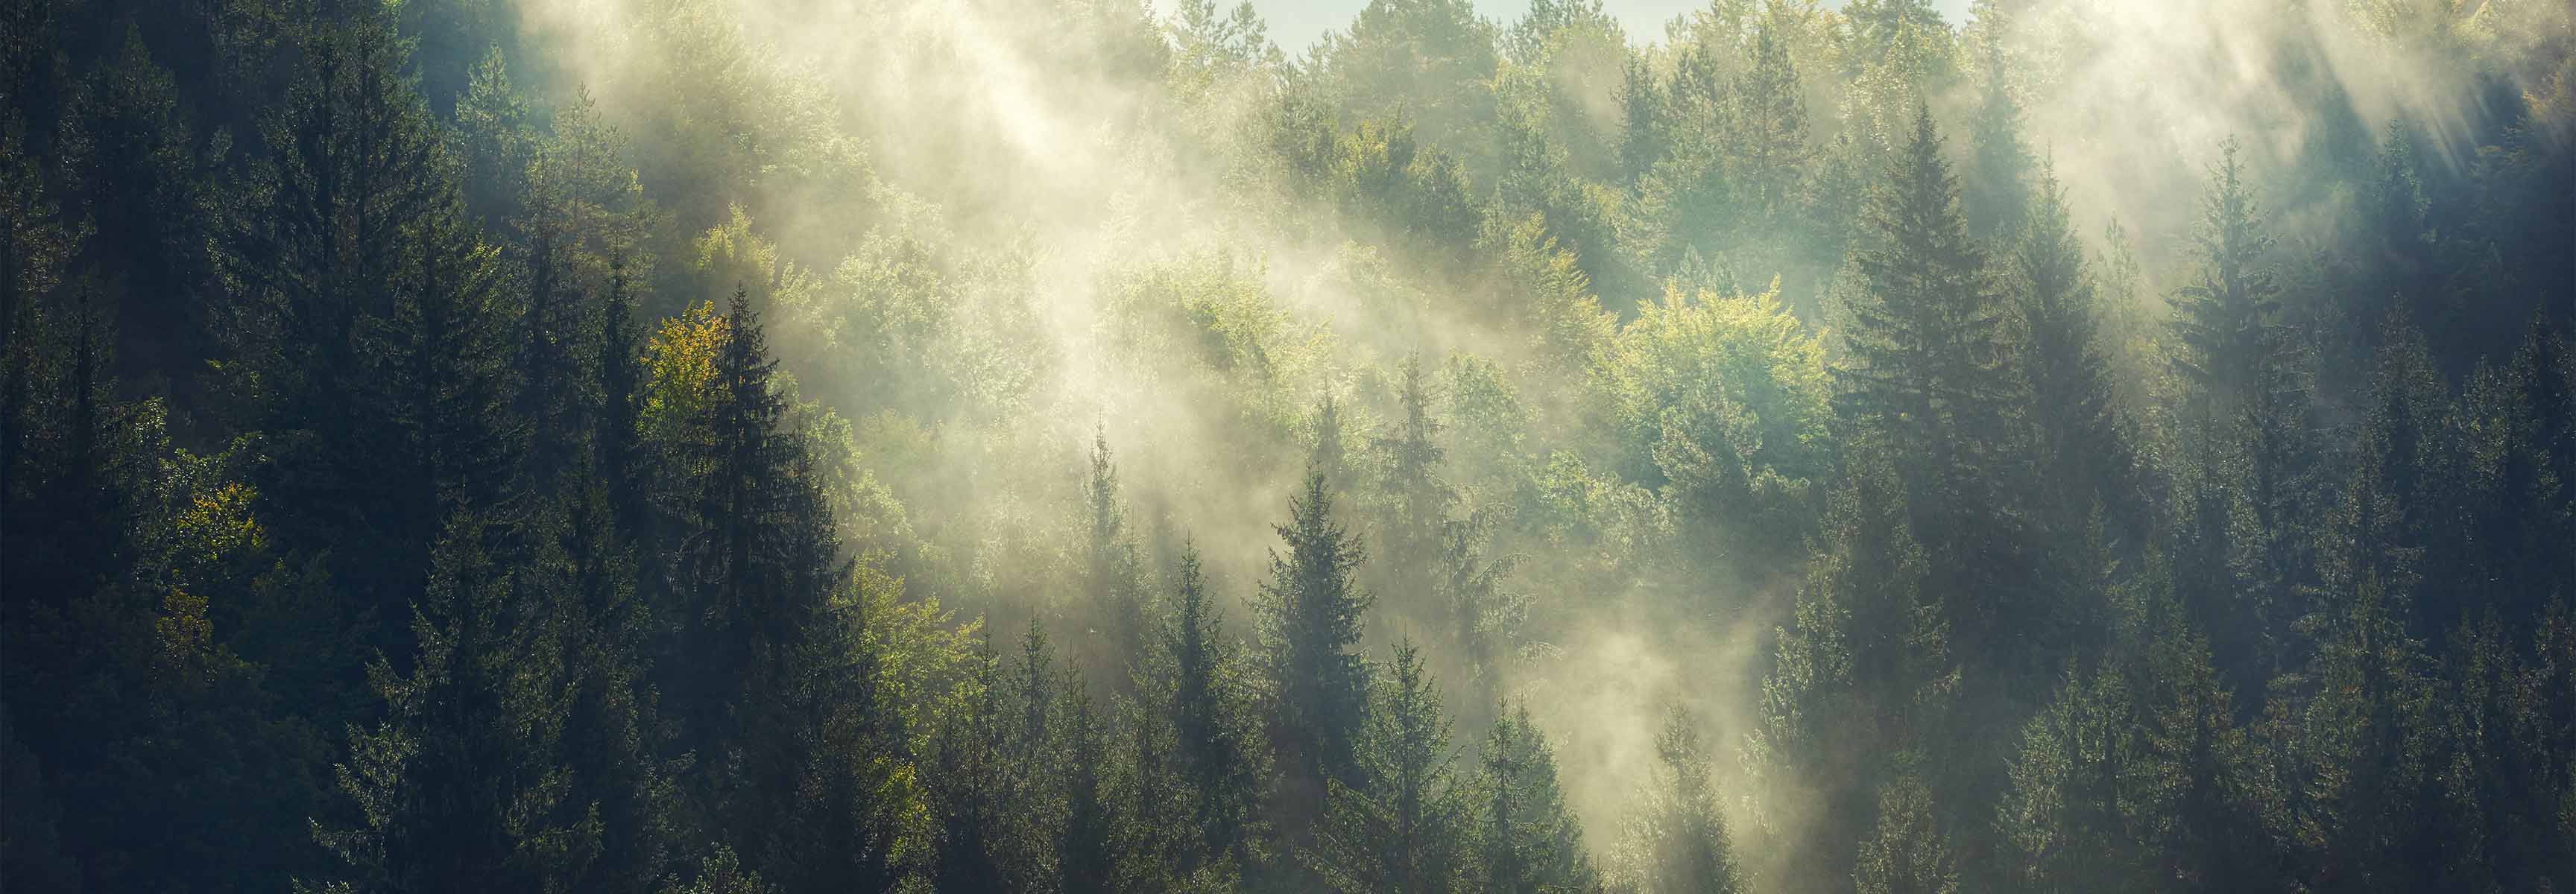 foggy pine forest